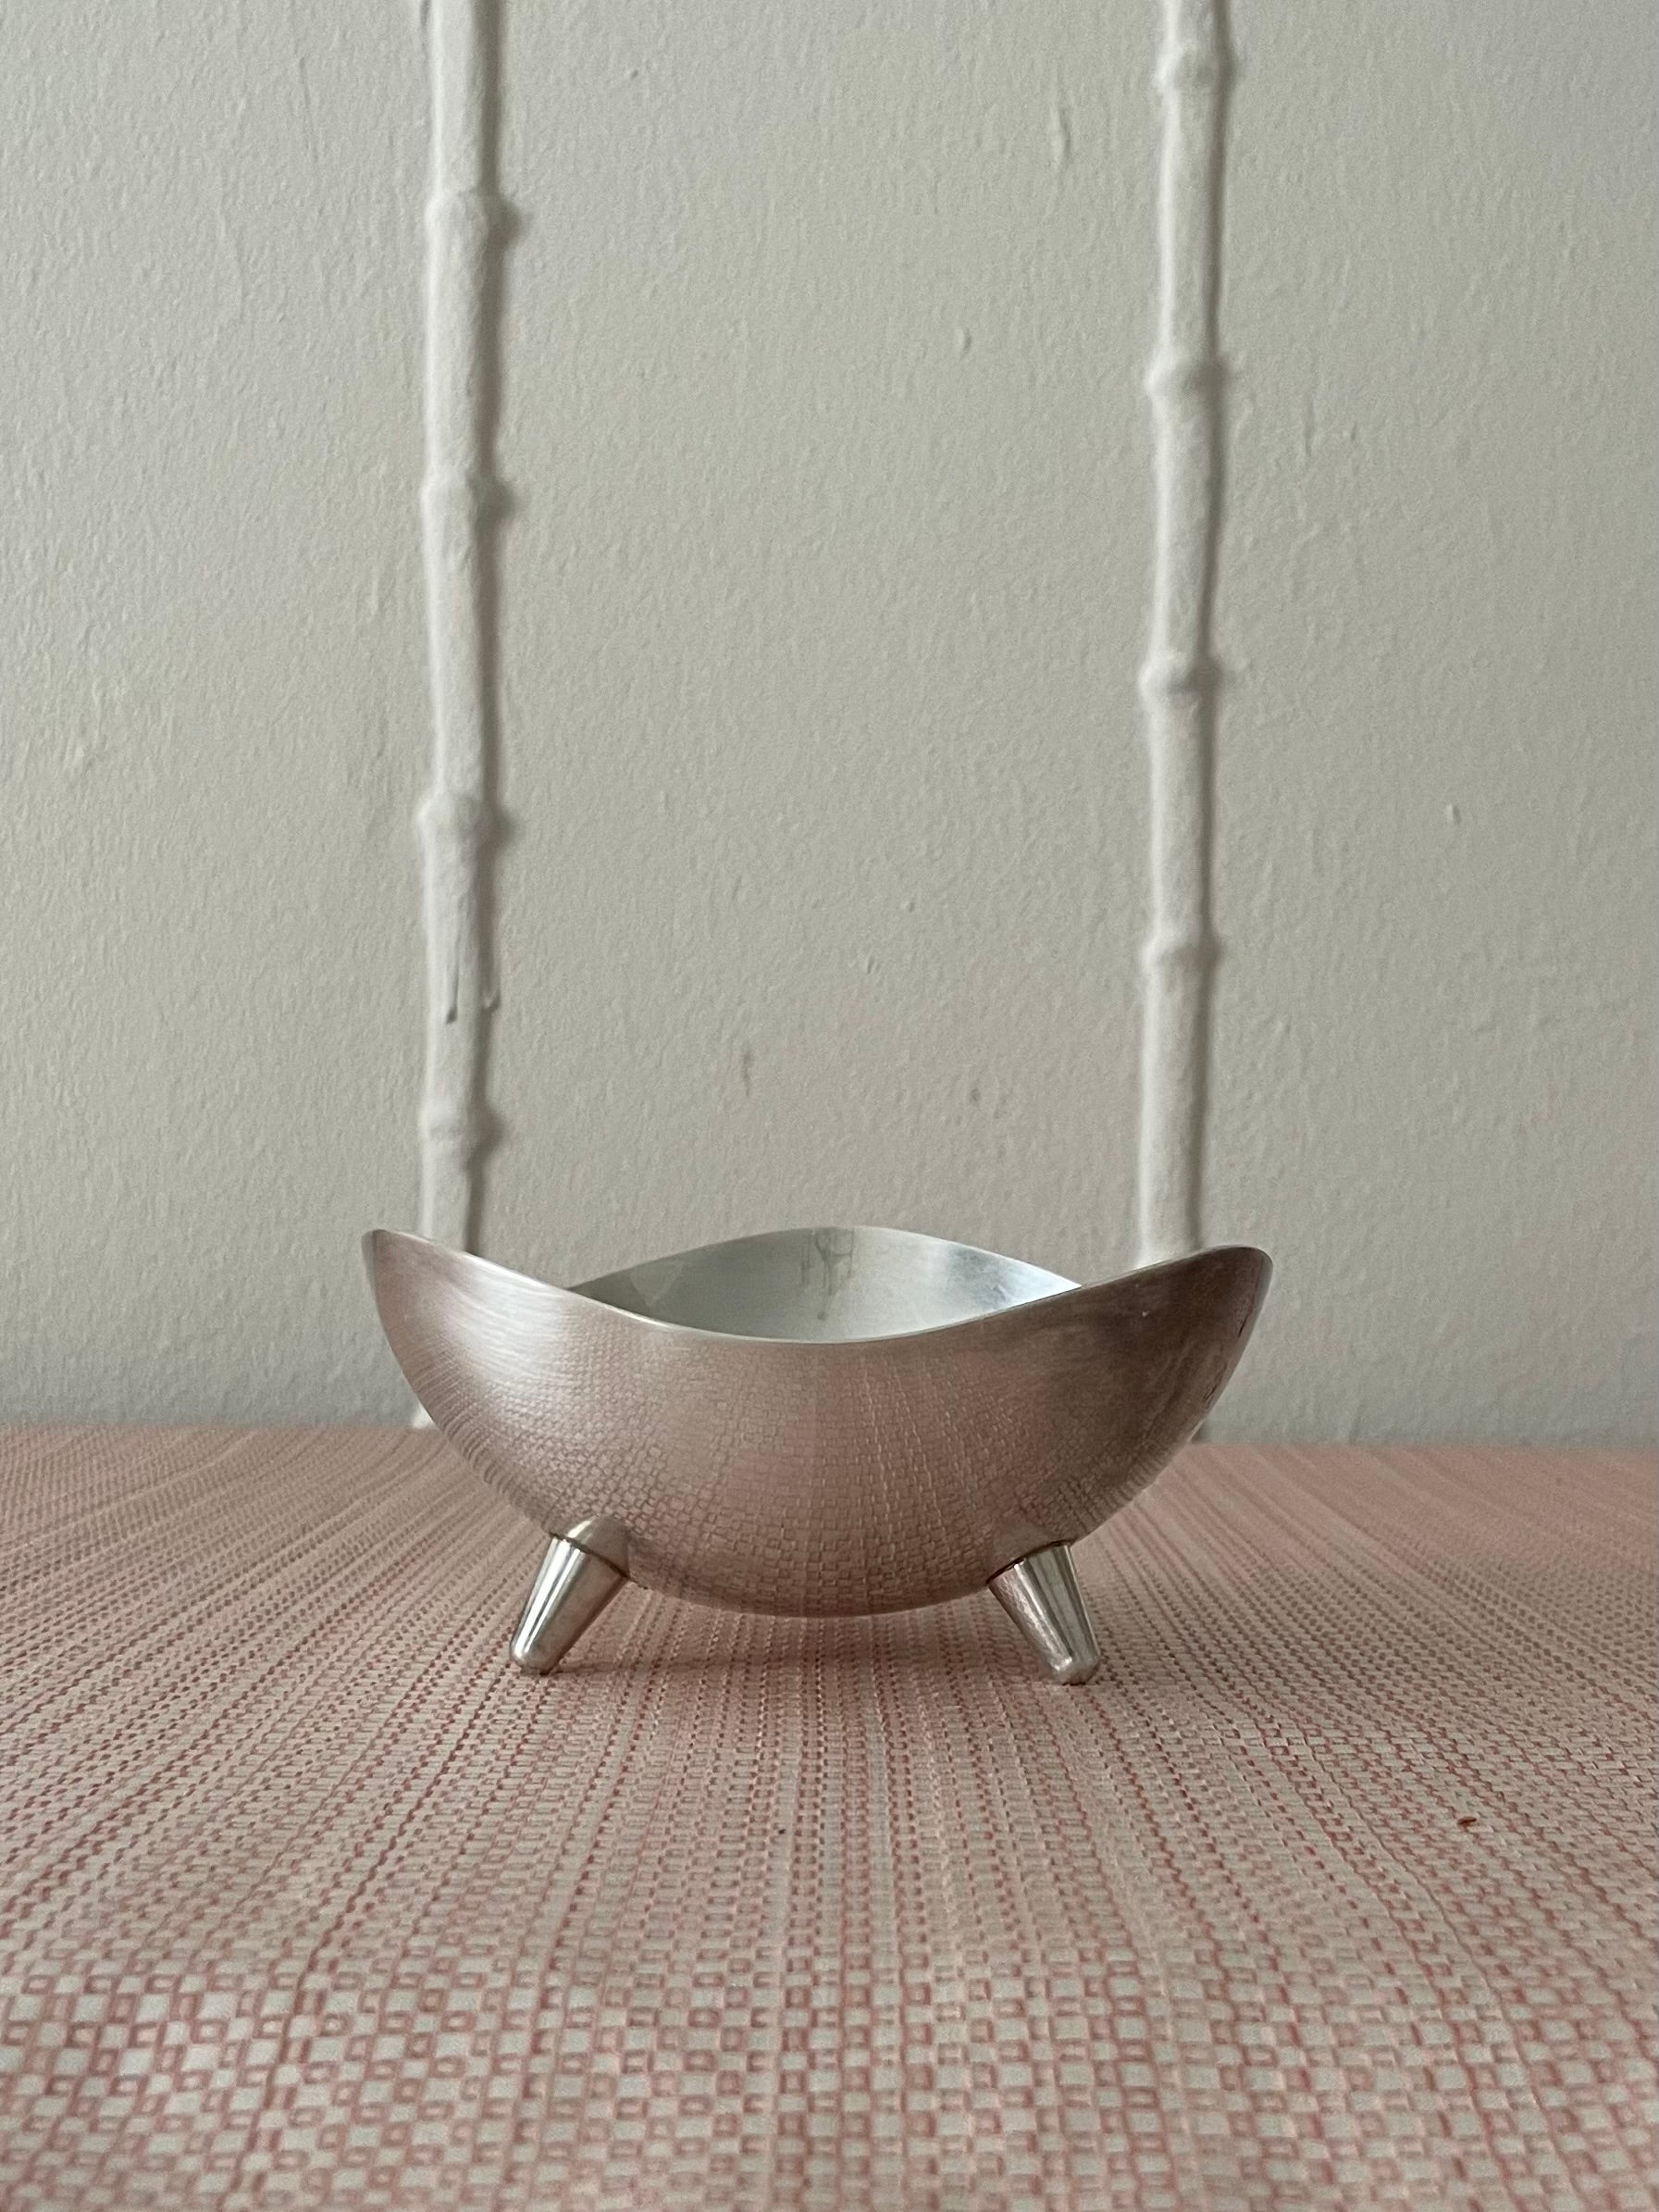 Silver plate bowl made by F.B. Rogers Silver Co. Lifted by a set of cute module feet, iconic midcentury modern. This bowl is ready to hold coins, keys to the guest house, matches, 420, business cards or whatever else you have laying around.